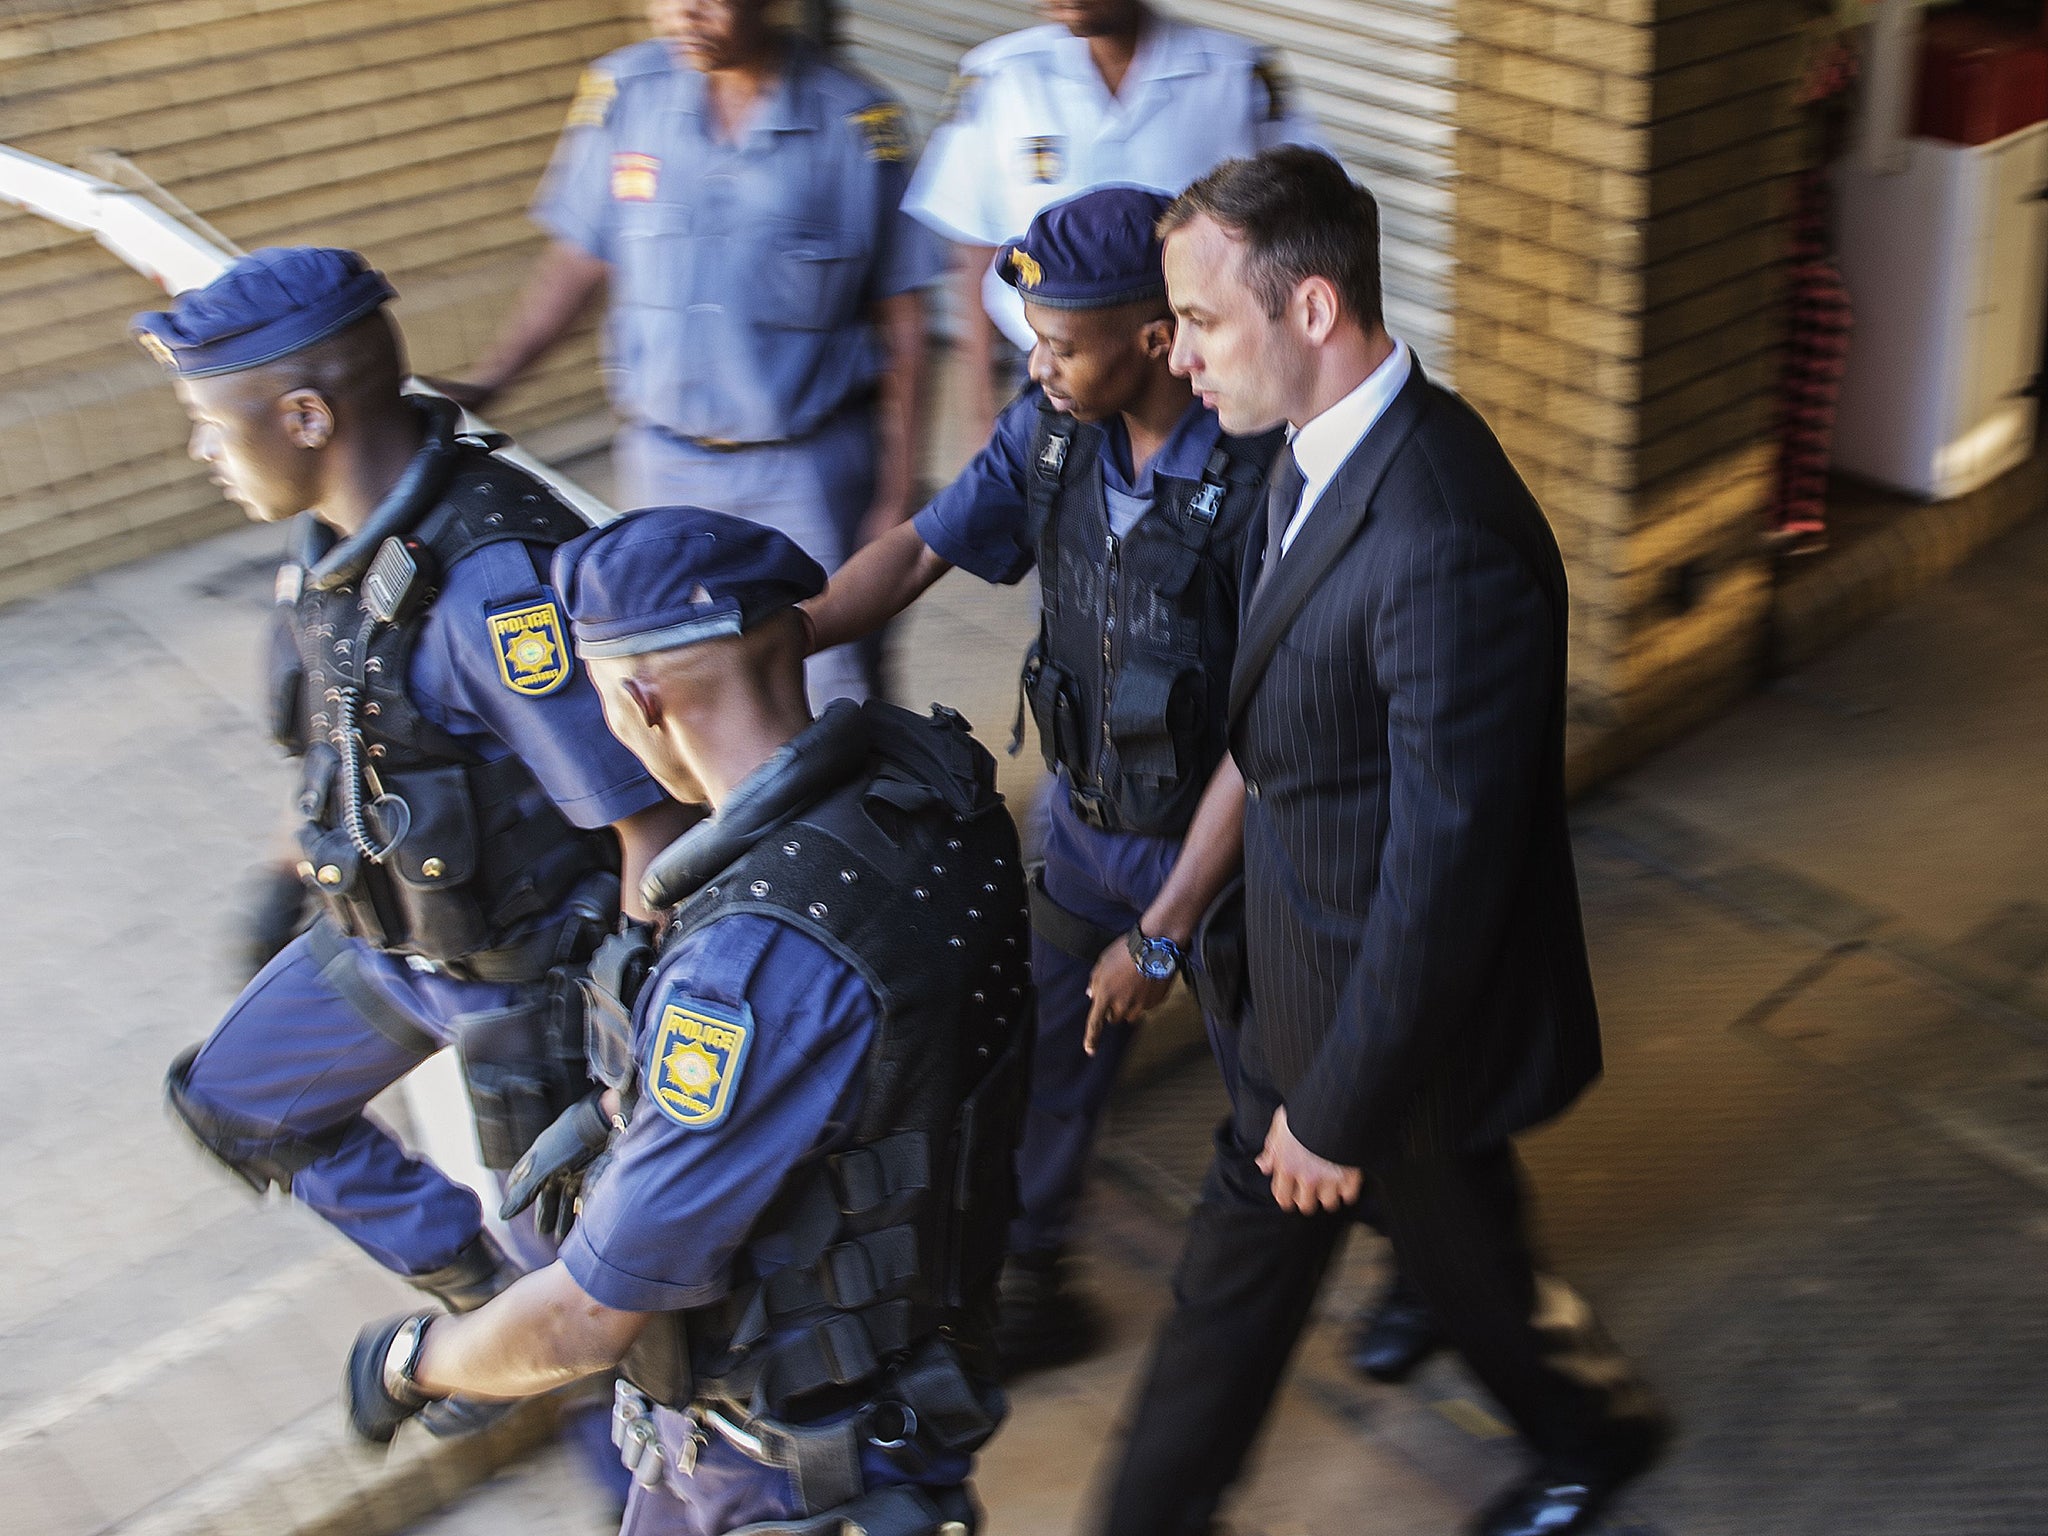 Oscar Pistorius is escorted by south African policemen to a police vehicle to transported to prison at the High Court in Pretoria